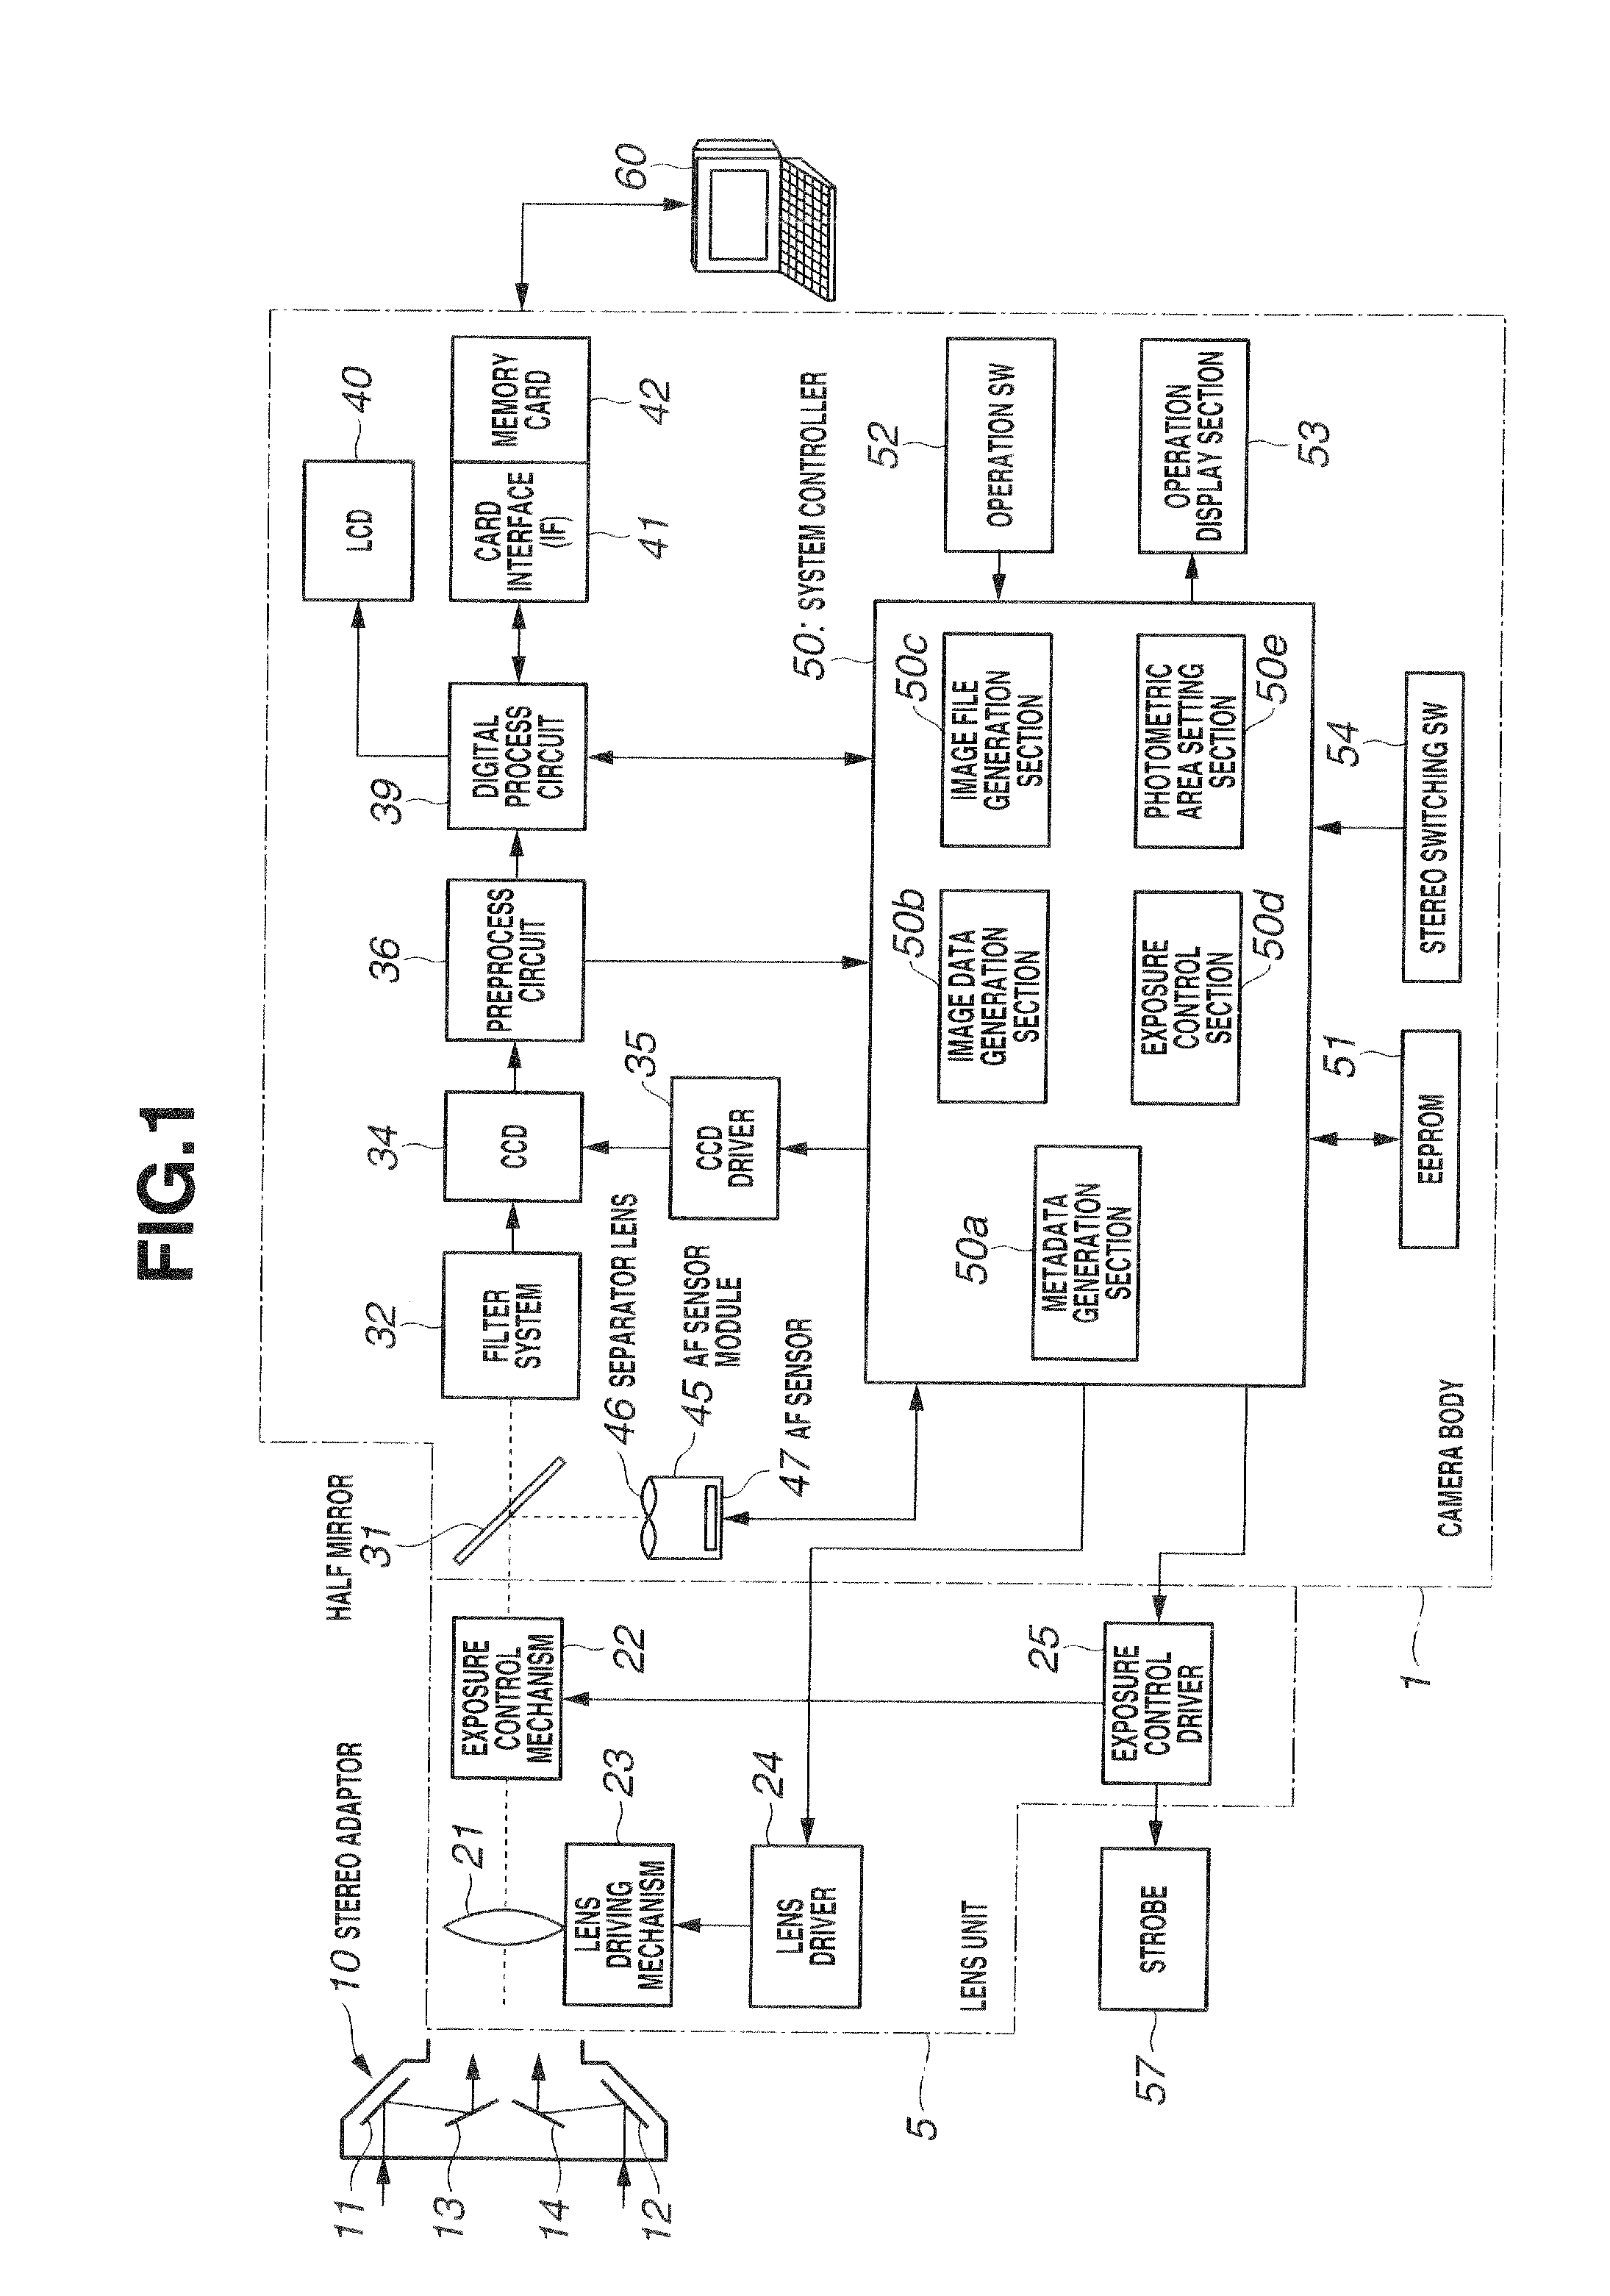 Image file processing apparatus, image file reproduction apparatus and image file working/editing apparatus